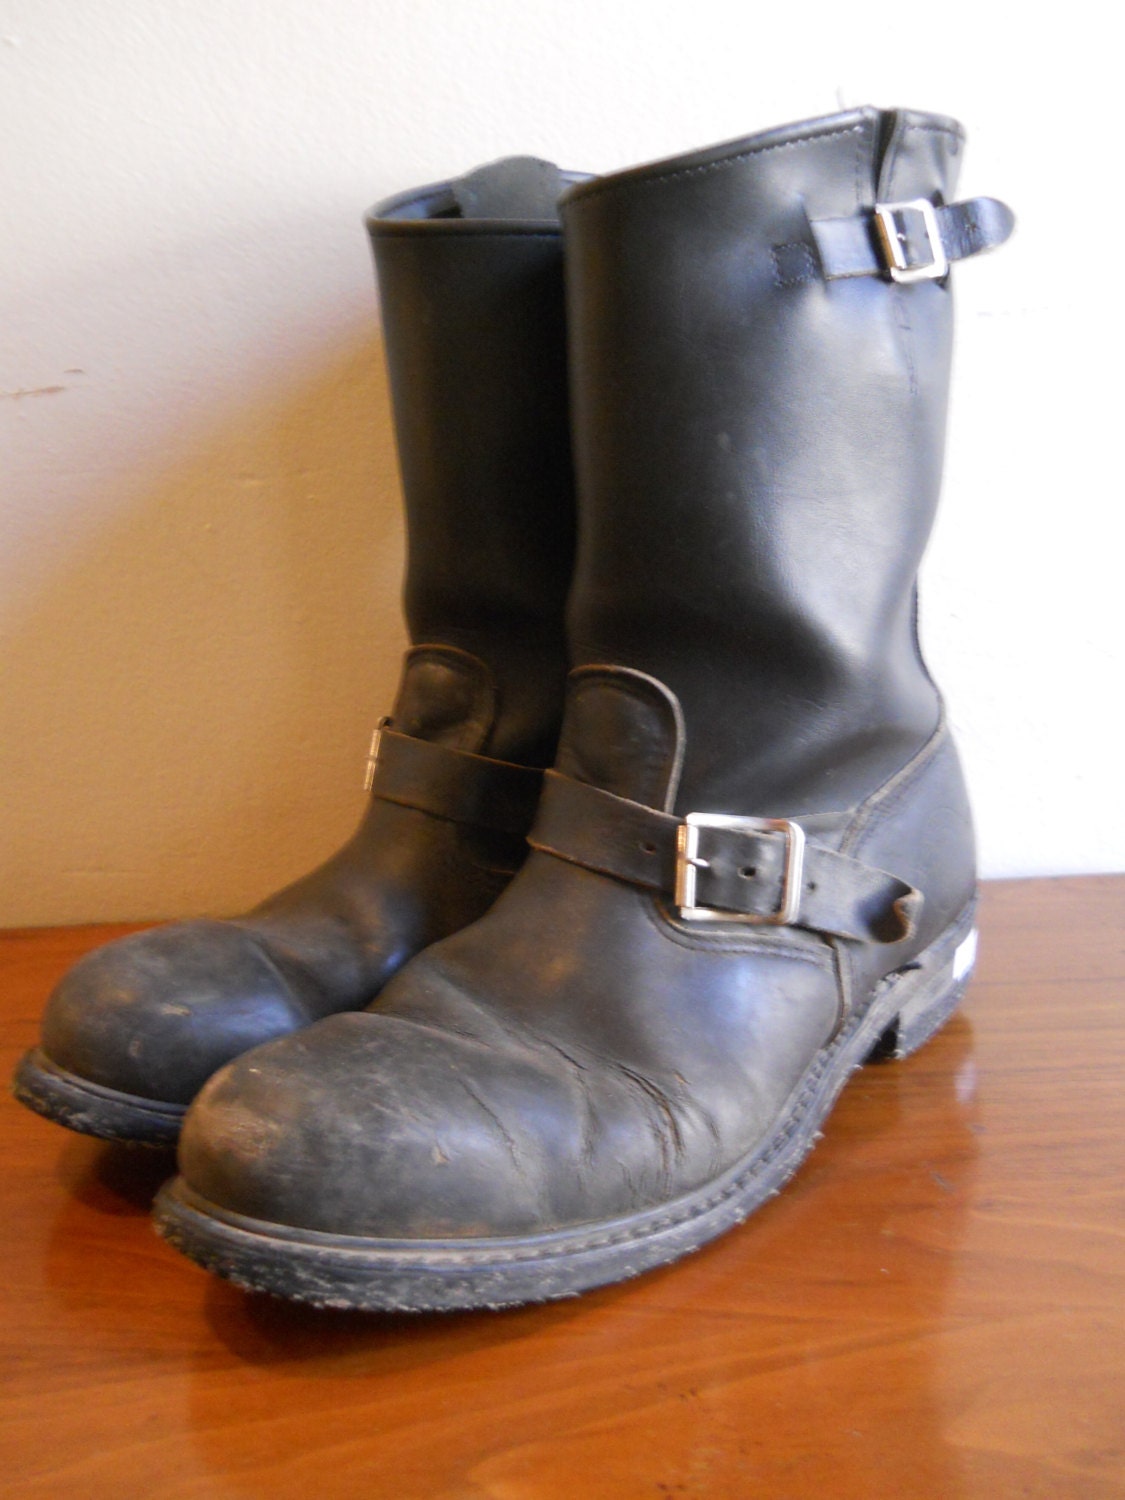 Vintage Brahma Motorcycle Engineer Boots 11 by travisshive on Etsy